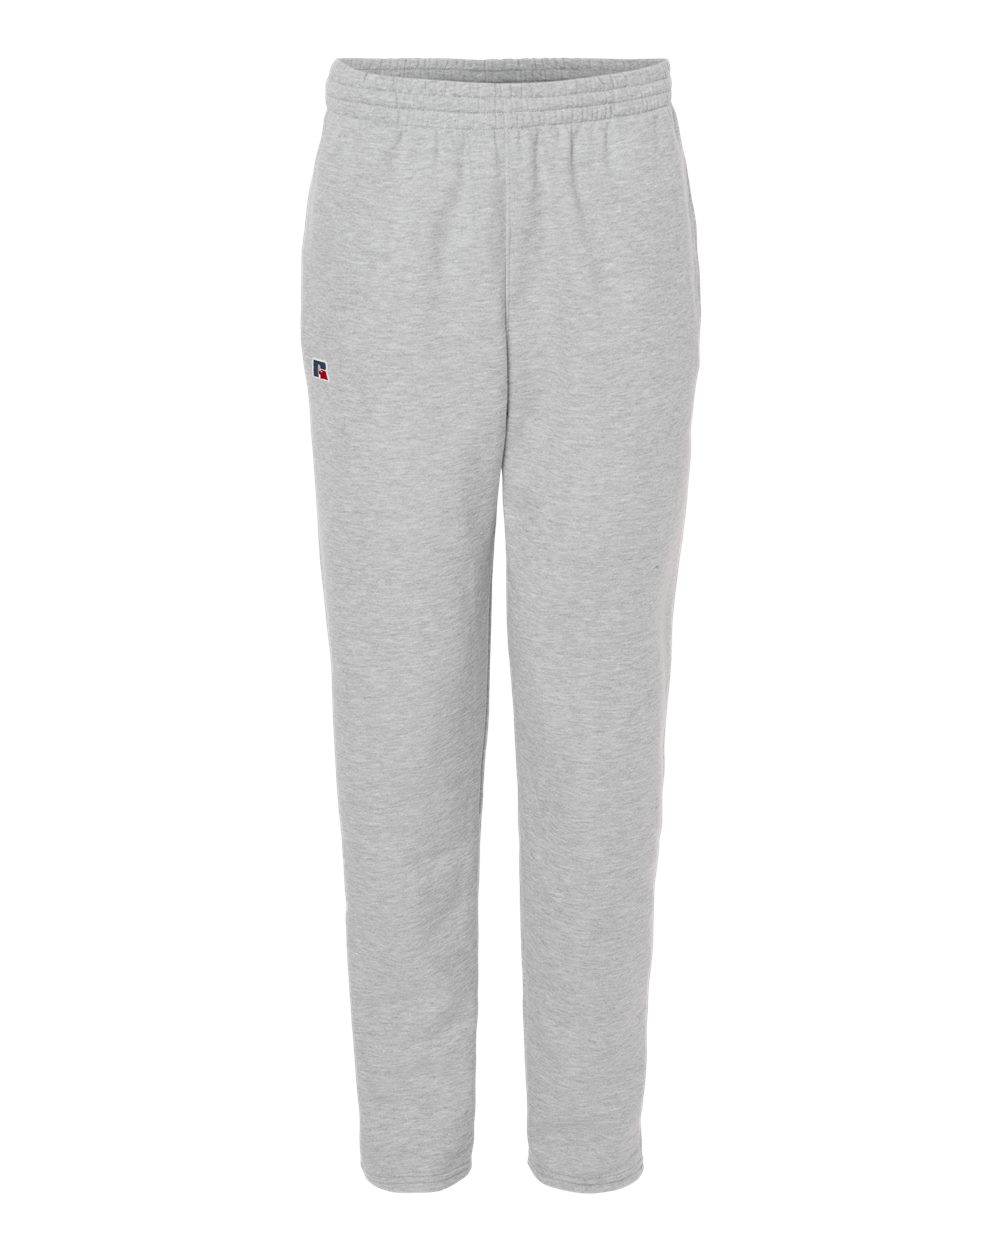 Russell Athletic 82ANSM, Cotton Rich Open Bottom Sweatpants